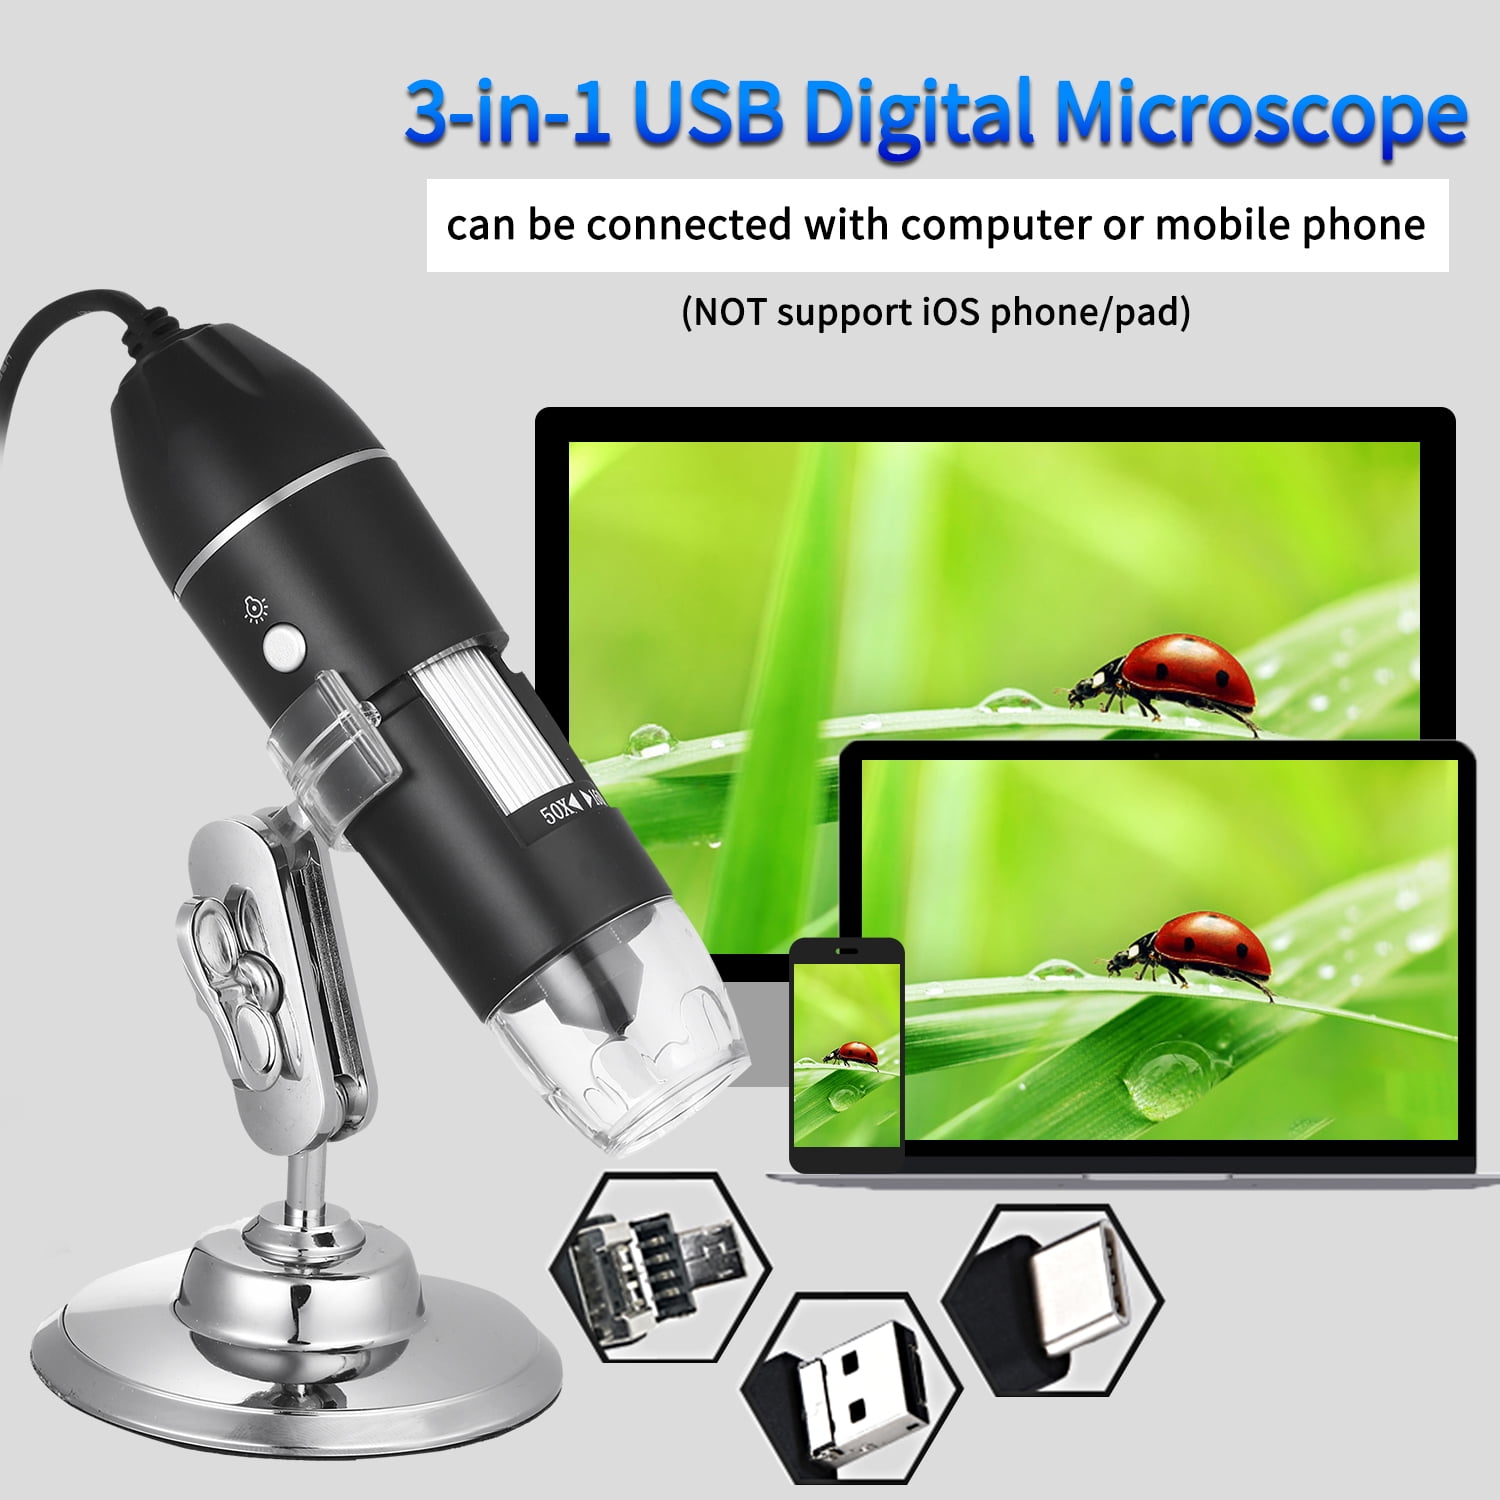 WY-YAN HZR 1000X 8 LEDs USB Digital Continuous Zoom Microscope Magnifier with Adjustable Aluminium Alloy Stand